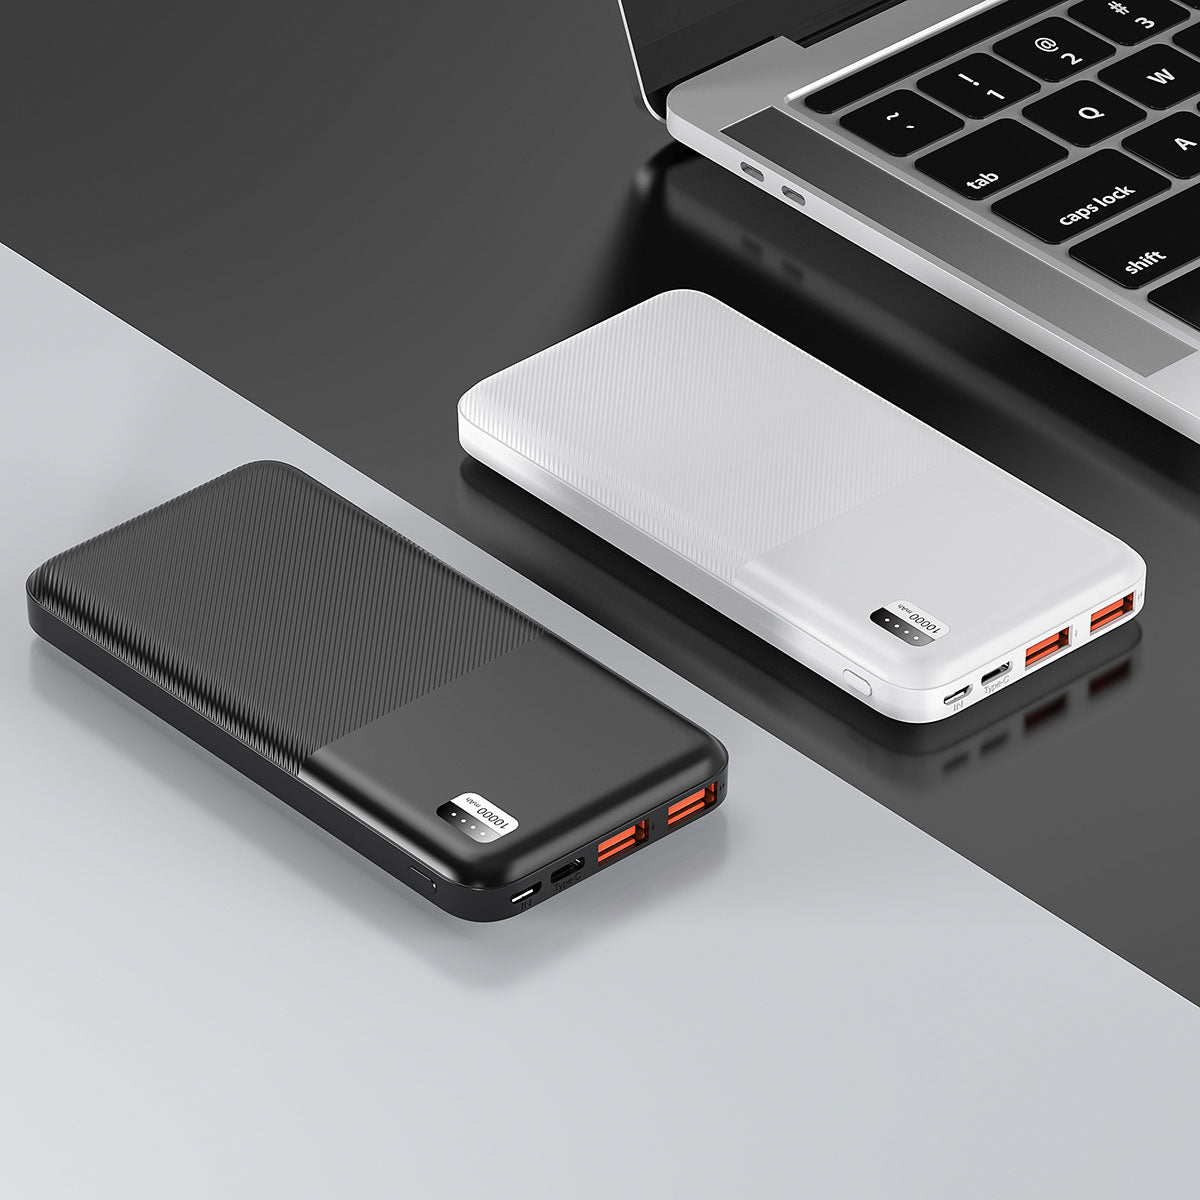 Xipin PX721 Dual USB Portable Powerbank 10000mAh with Quick Charge LED Light Indicator